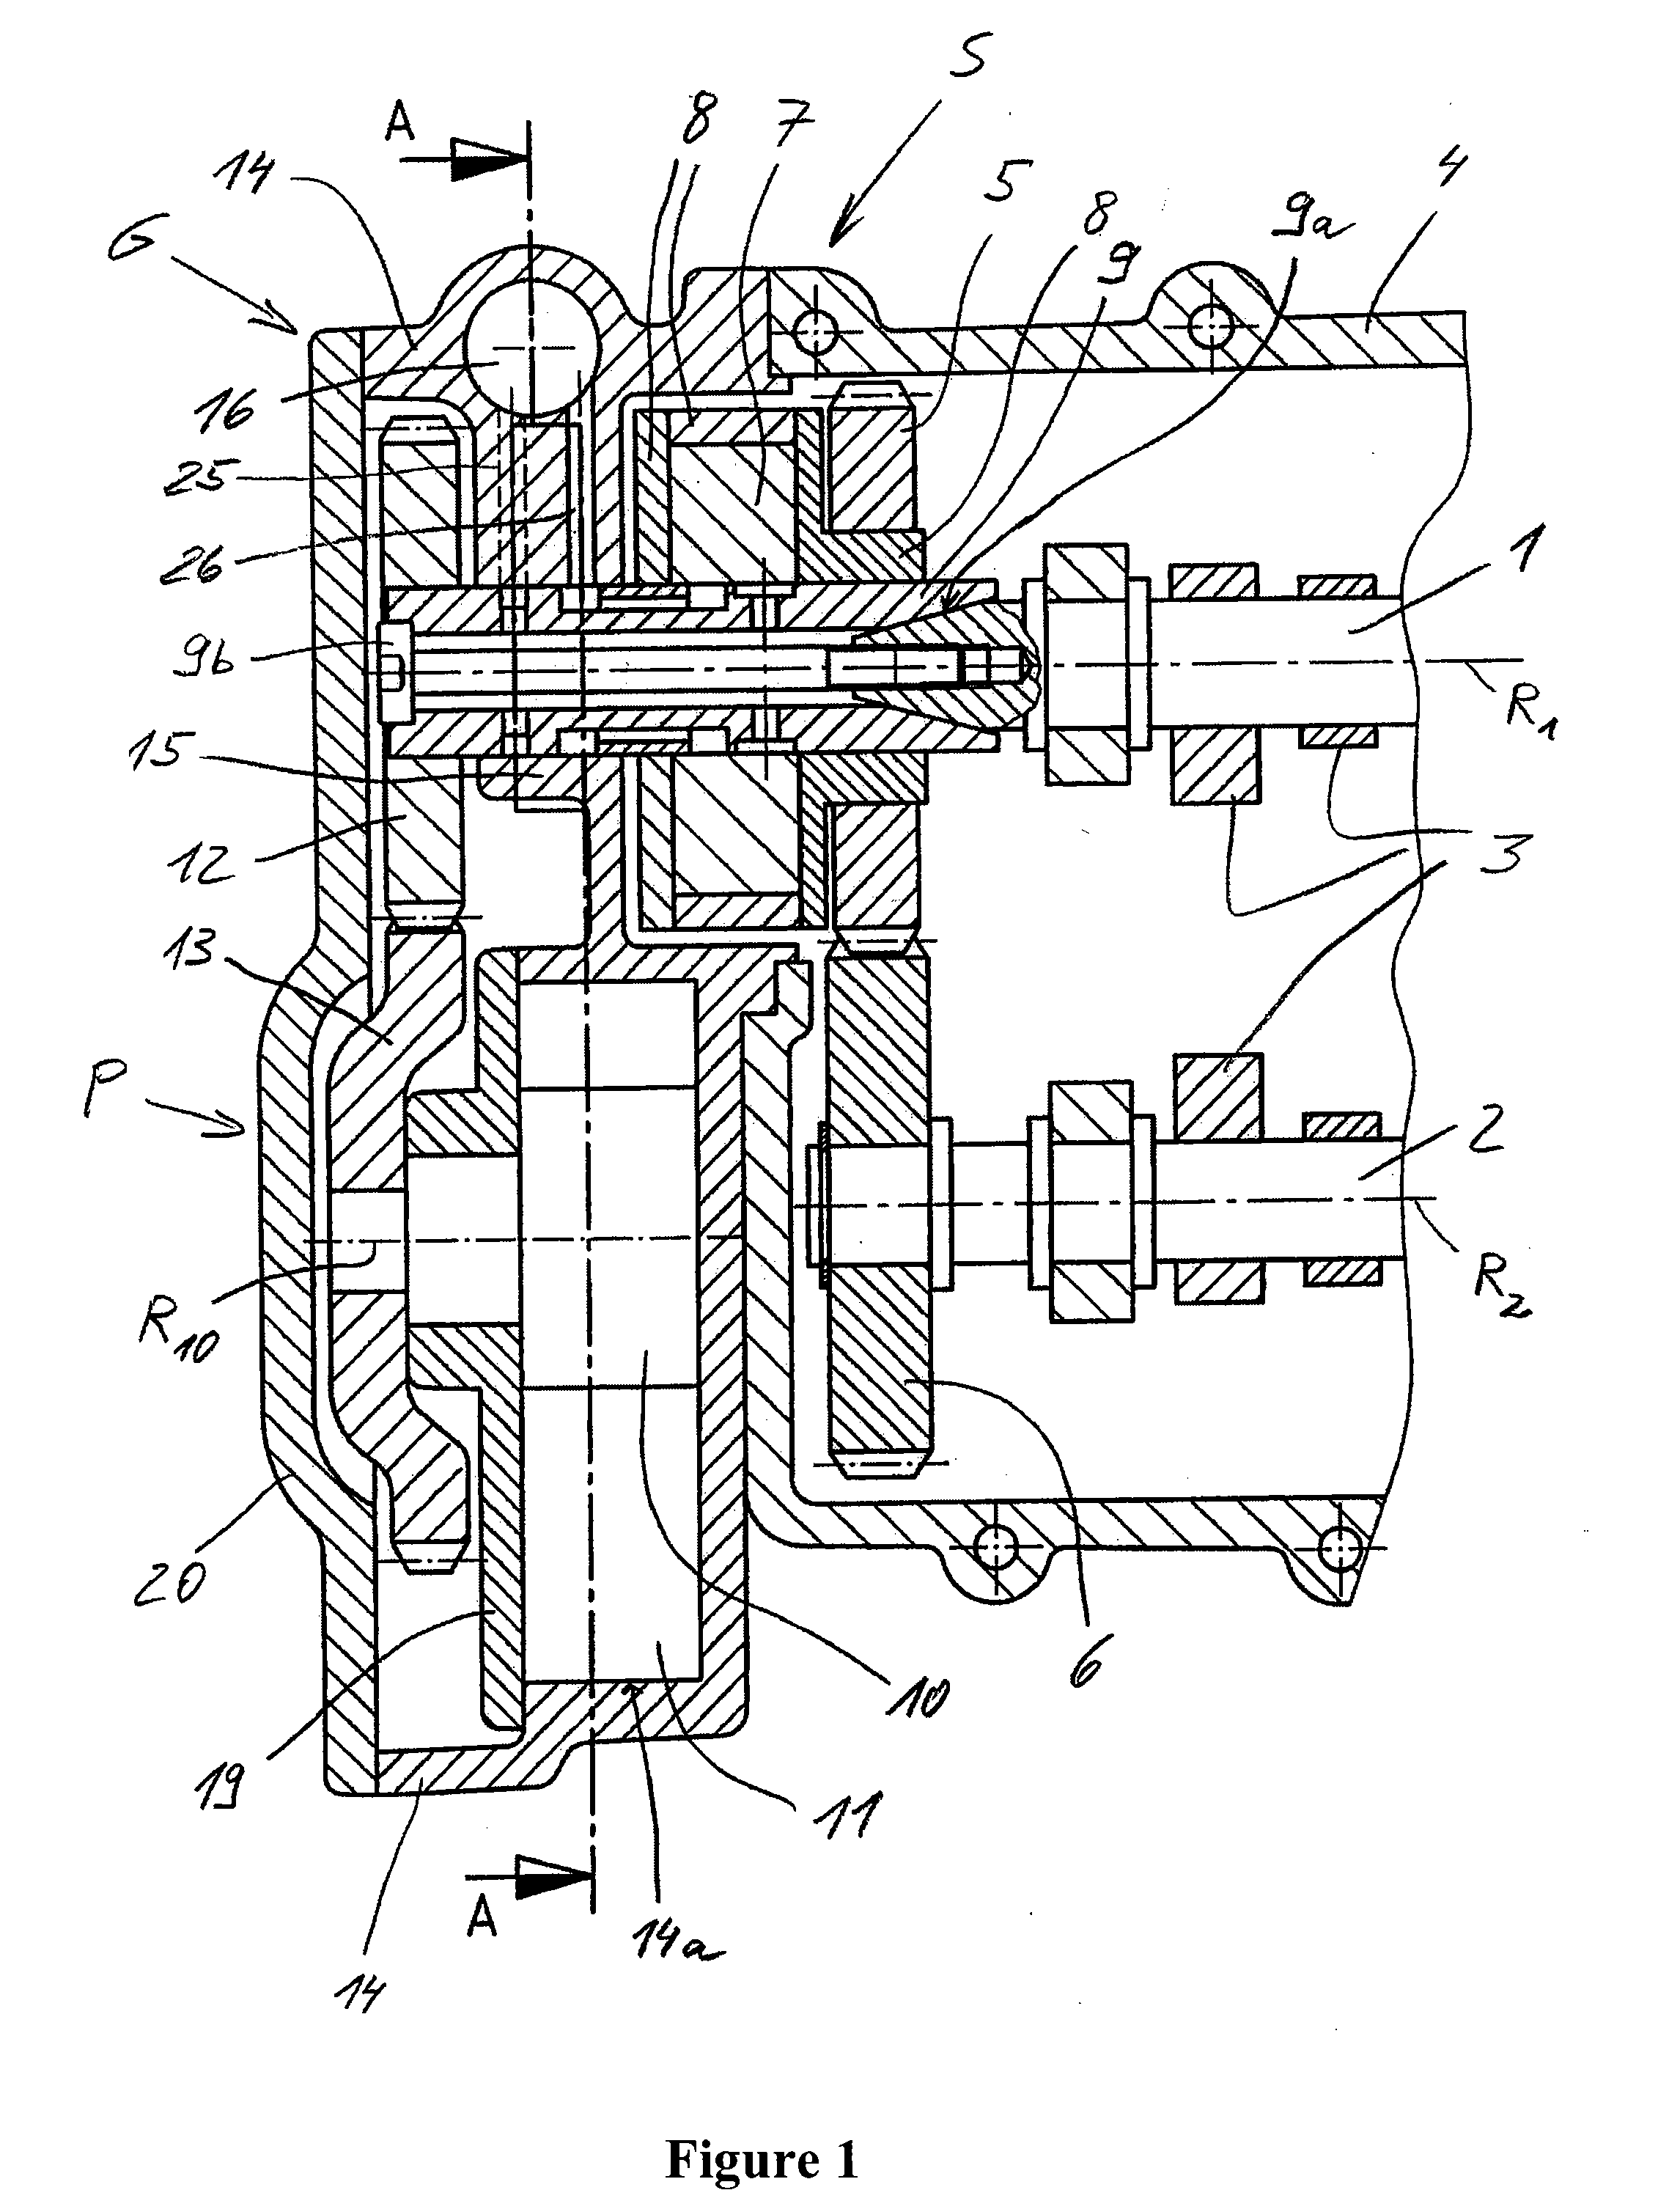 Cam shaft phase setter and vacuum pump for an internal combustion engine